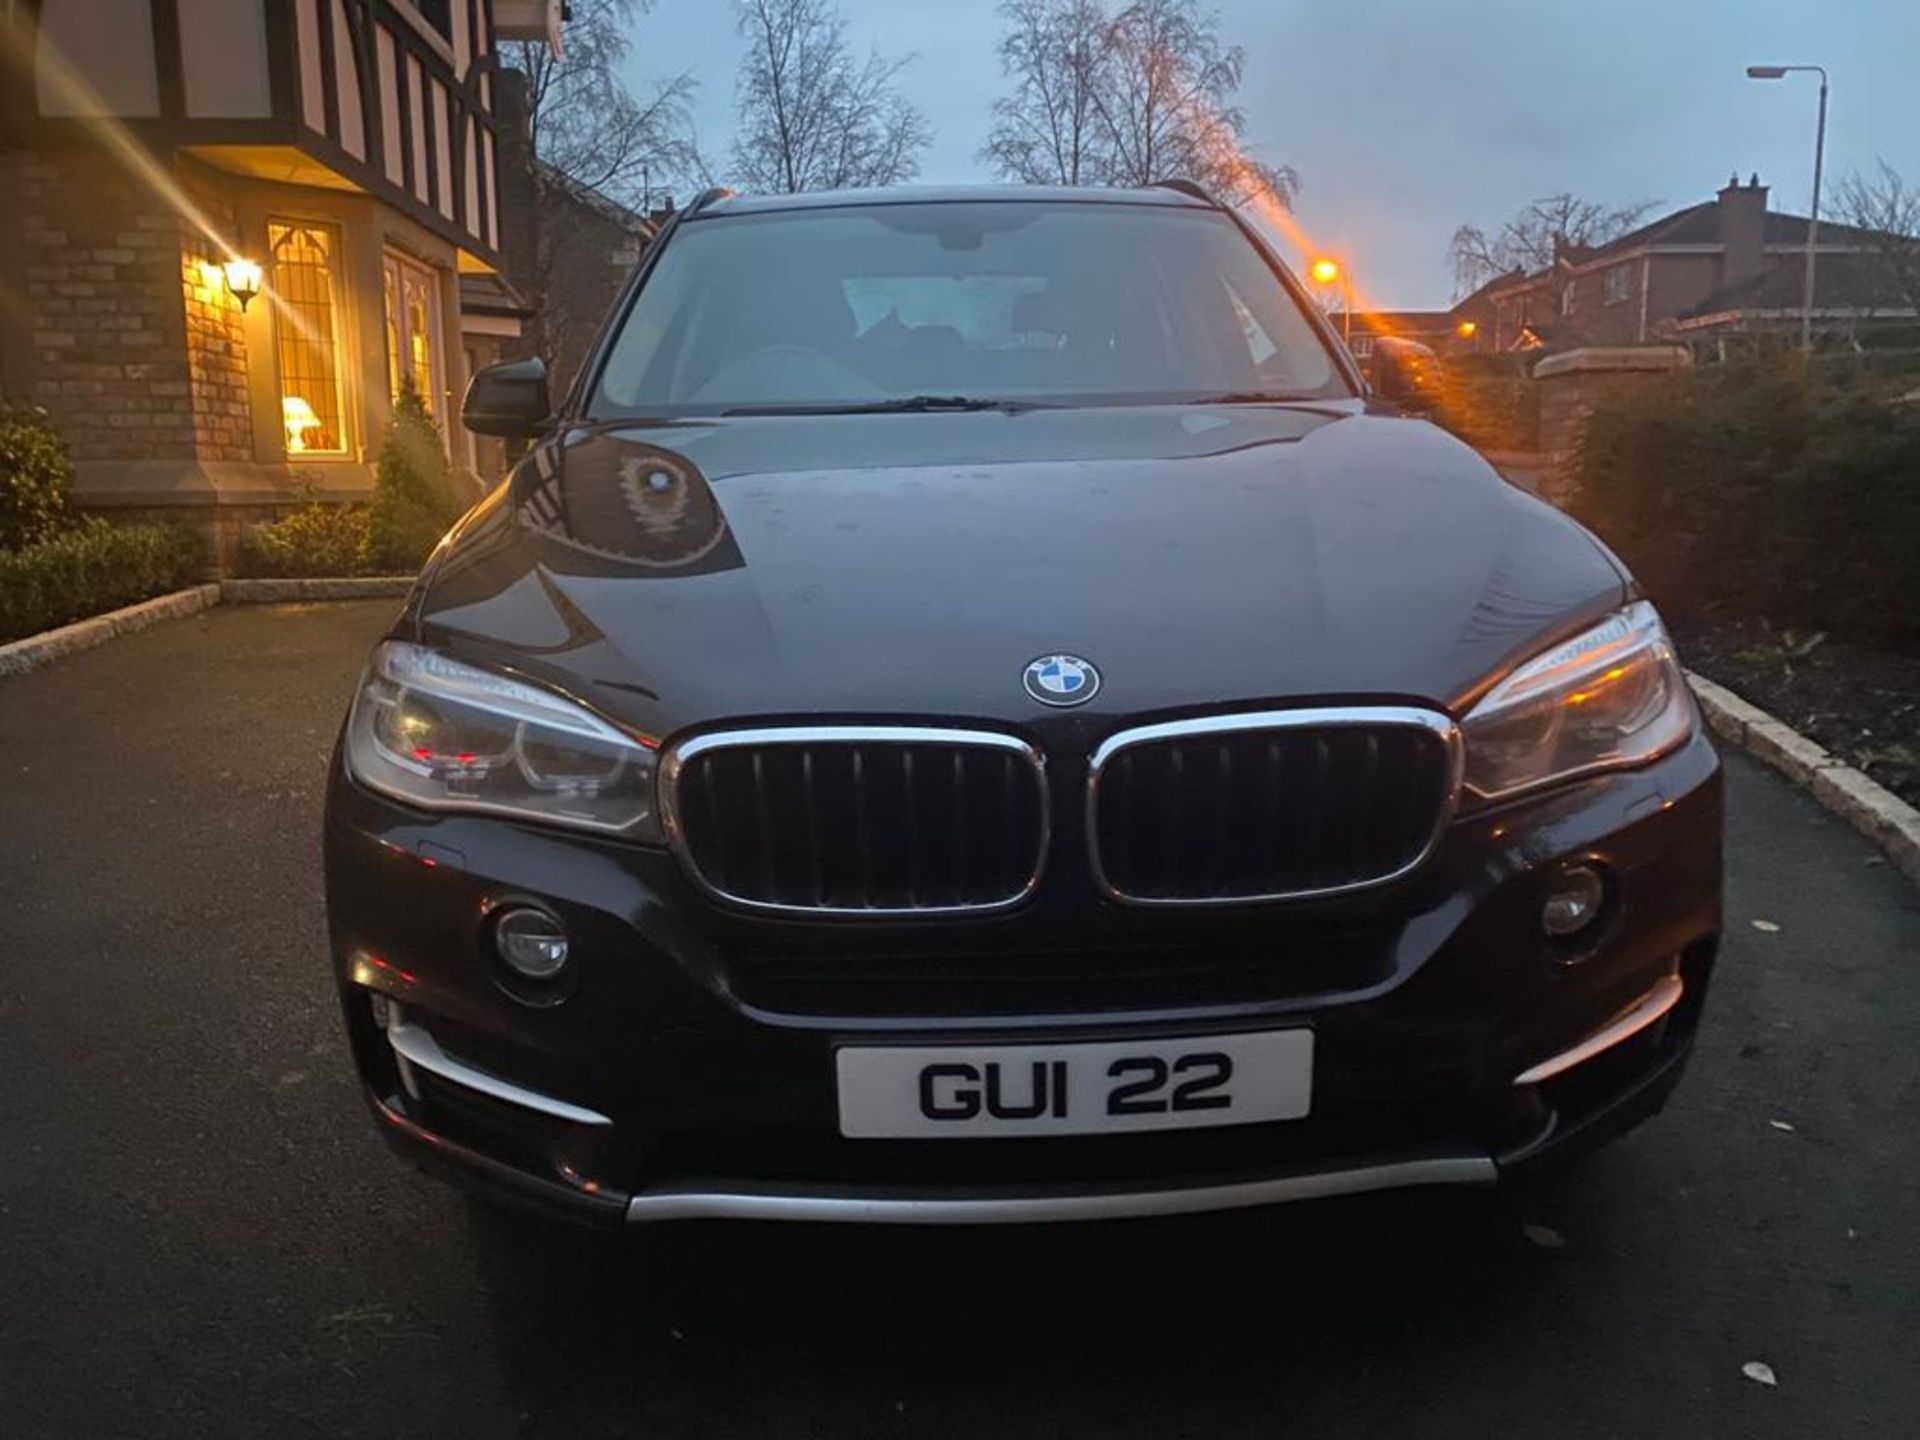 2013/63 REG BMW X5 XDRIVE30D SE AUTO 3.0 DIESEL AUTO, SHOWING 1 FORMER KEEPER *NO VAT* - Image 2 of 7